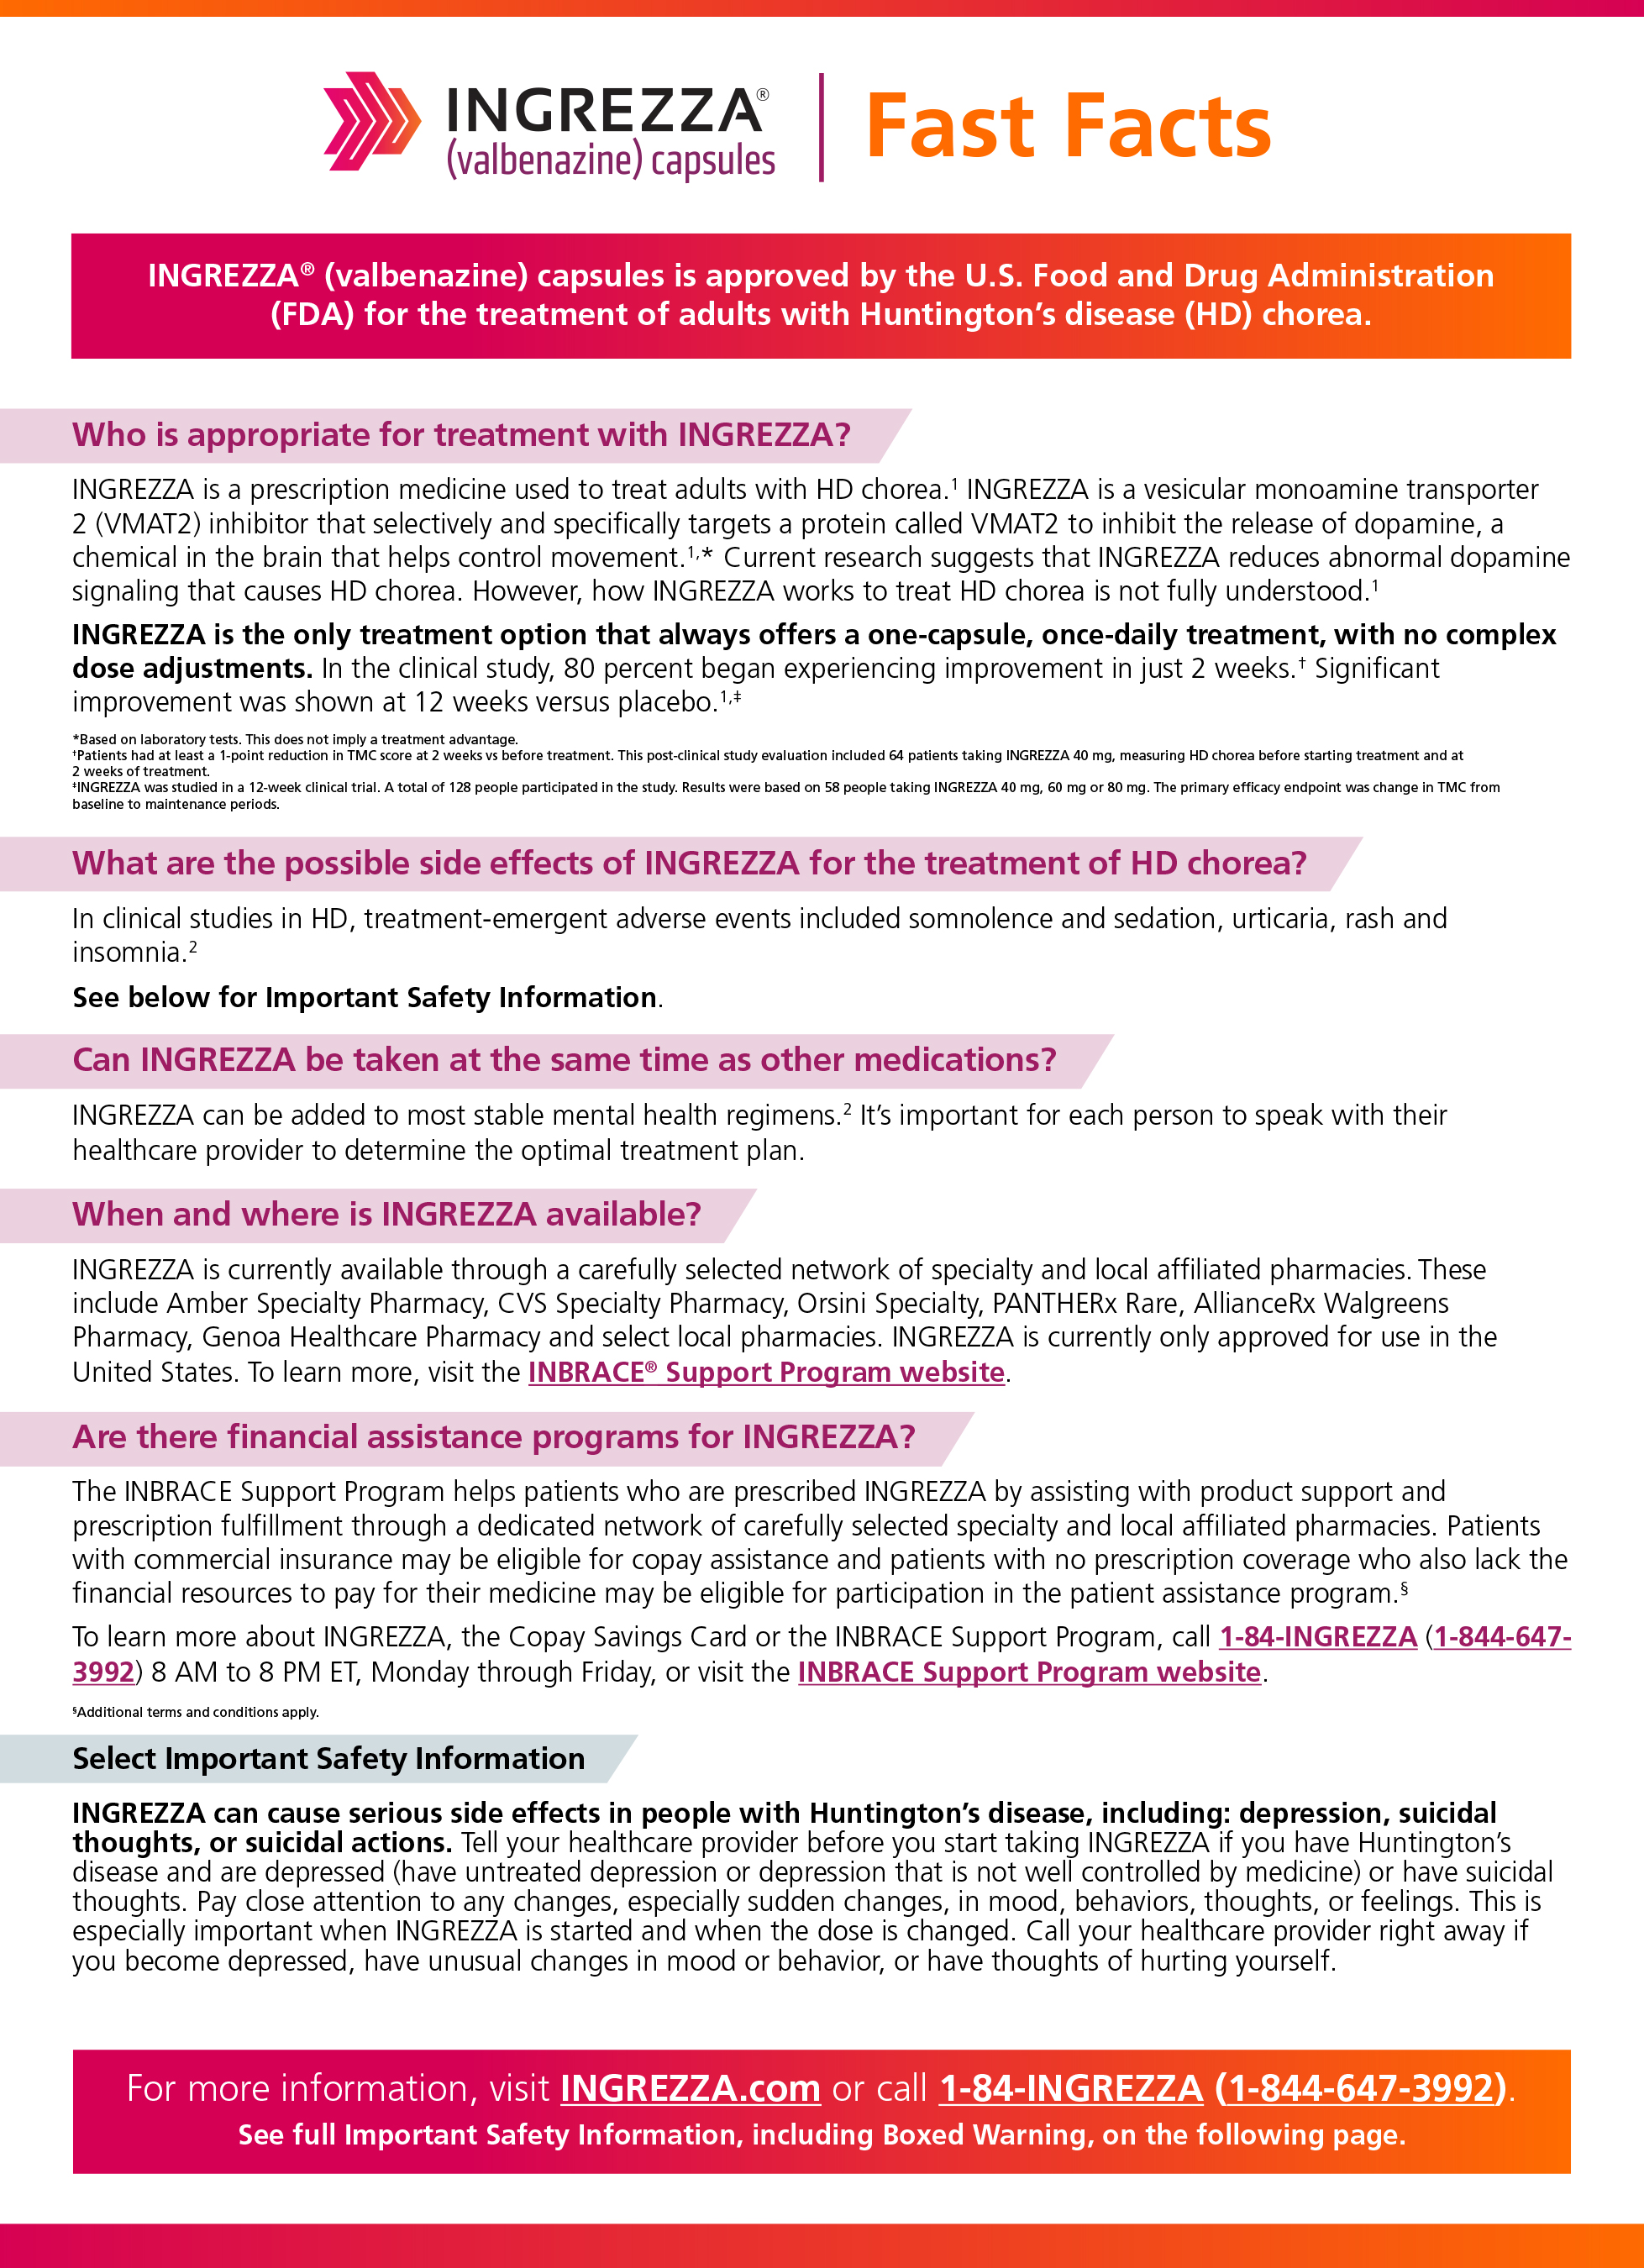 Fact sheet containing questions and answers about INGREZZA’s FDA approval